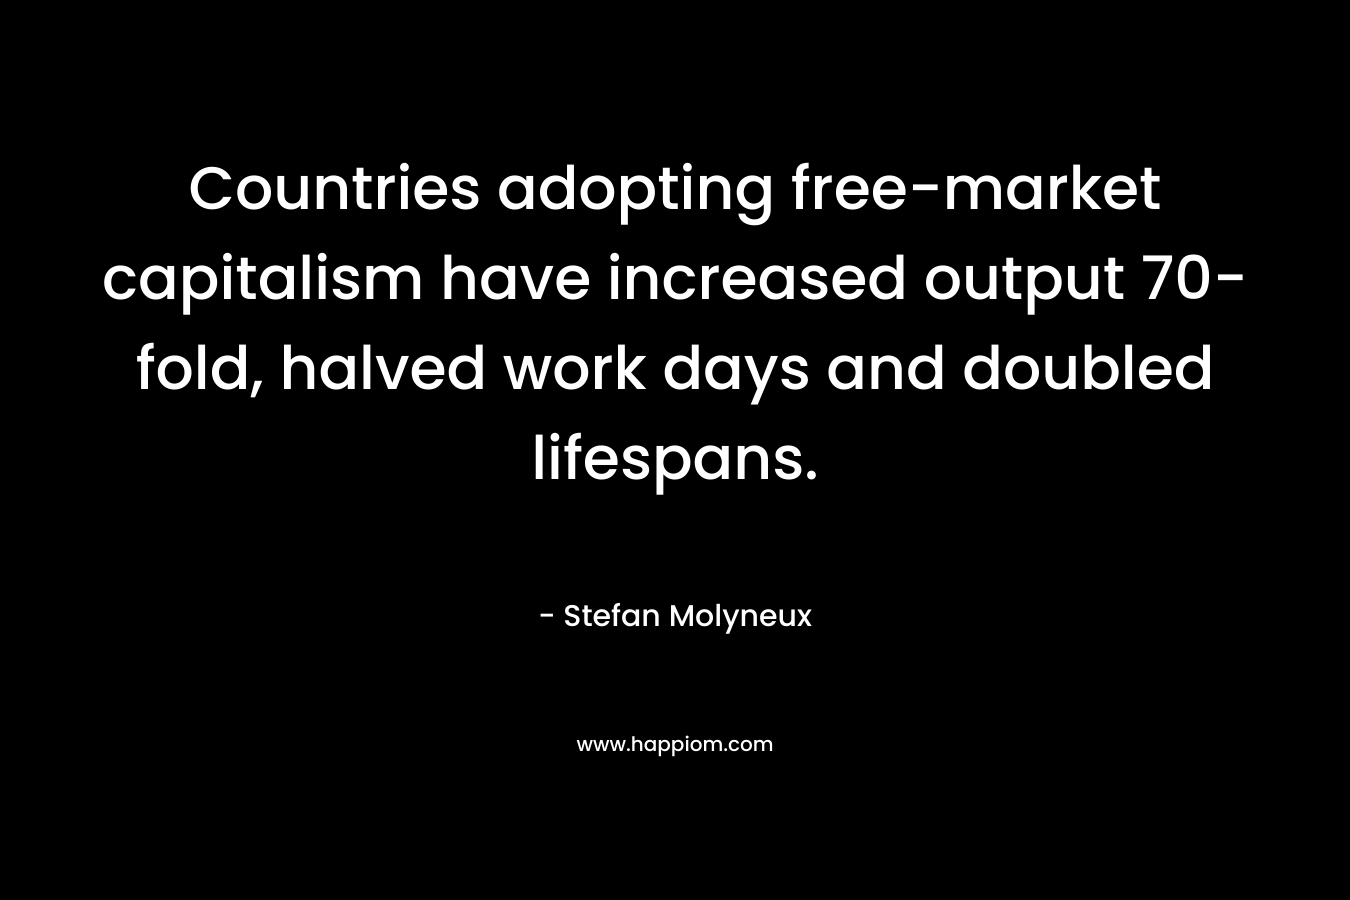 Countries adopting free-market capitalism have increased output 70-fold, halved work days and doubled lifespans. – Stefan Molyneux